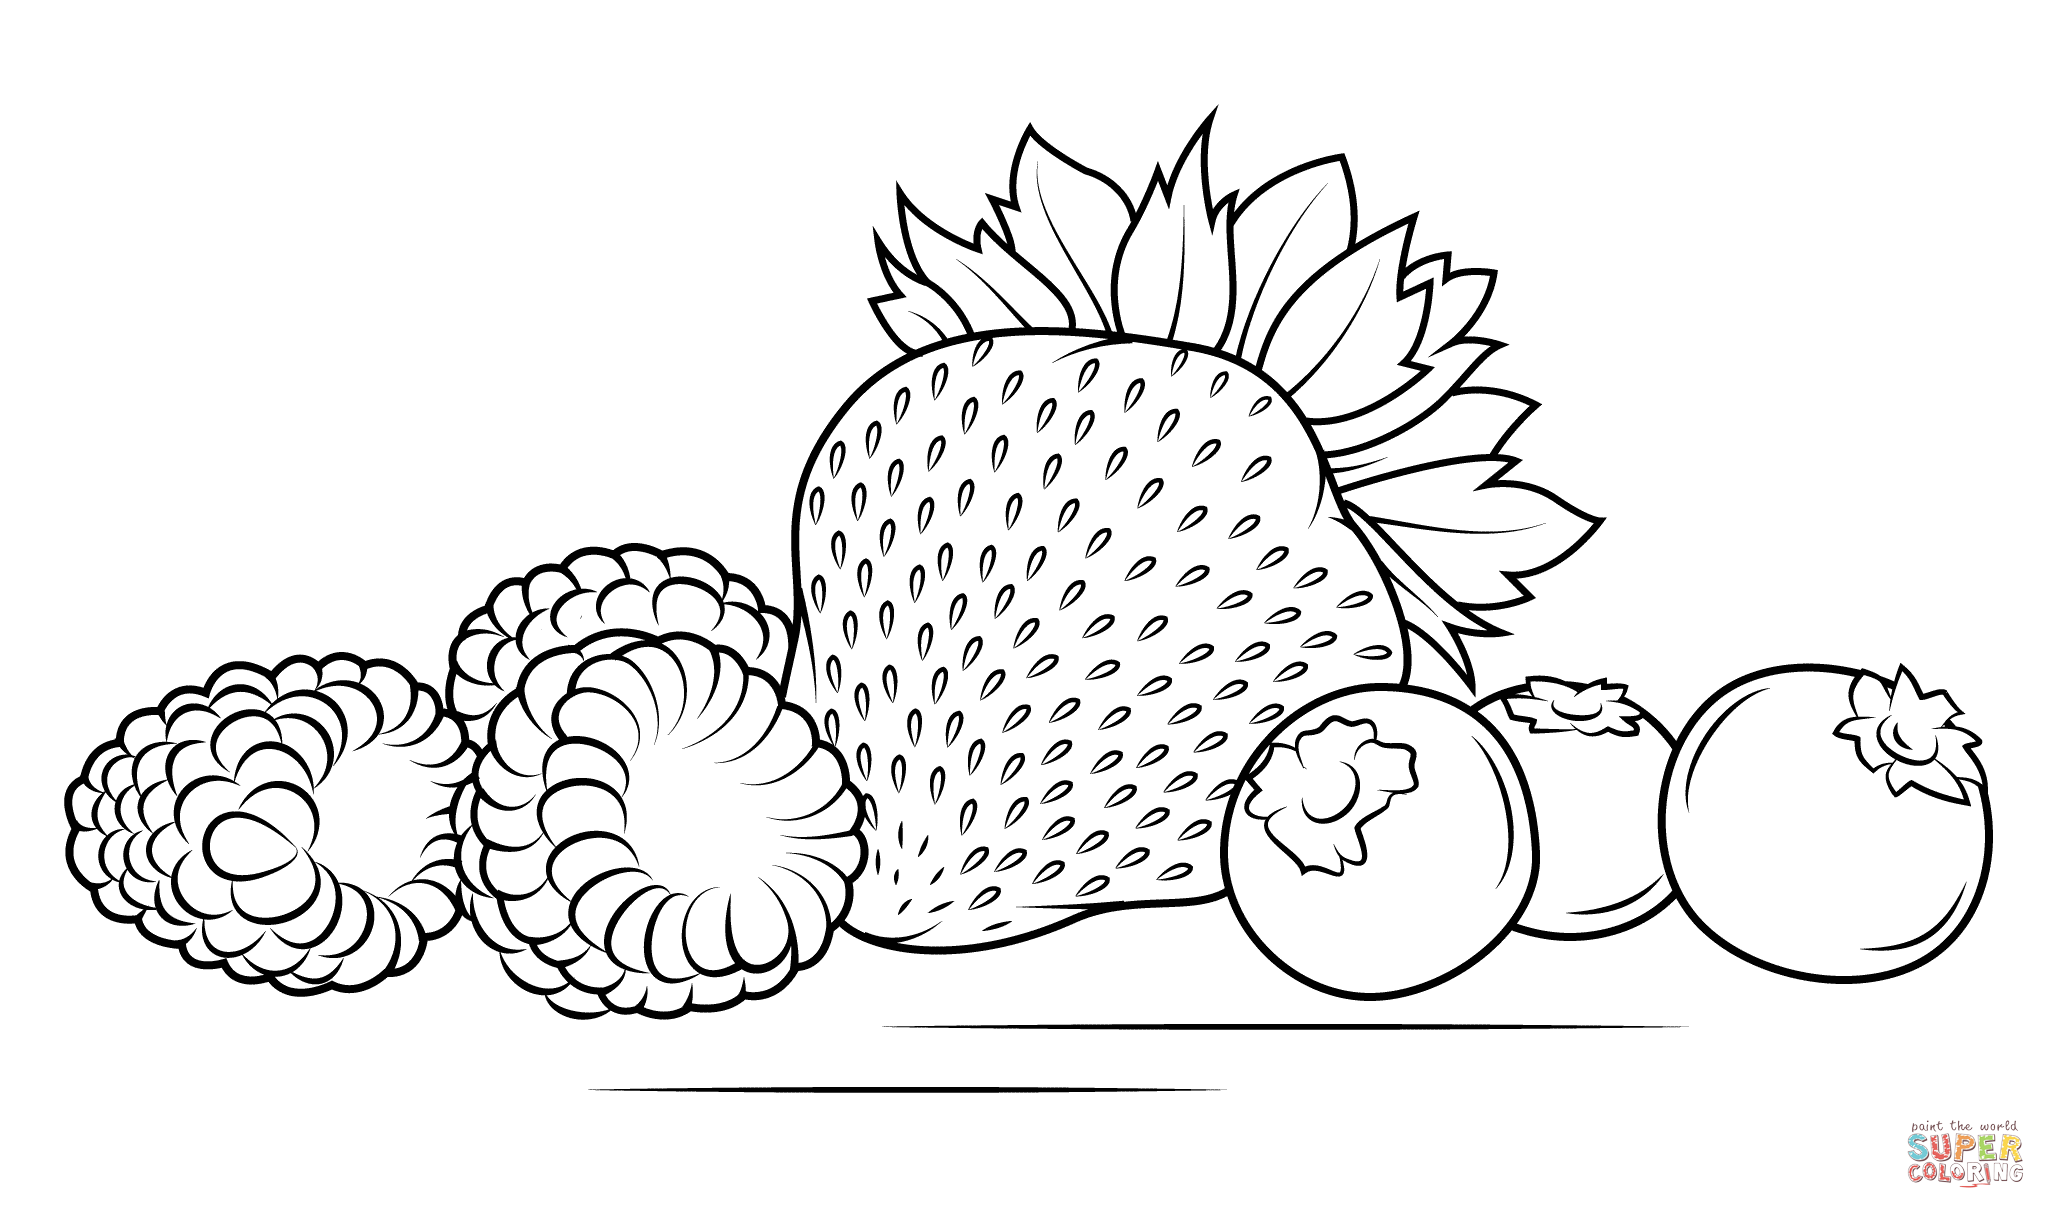 Strawberries, Raspberries and Blueberries coloring page | Free ...